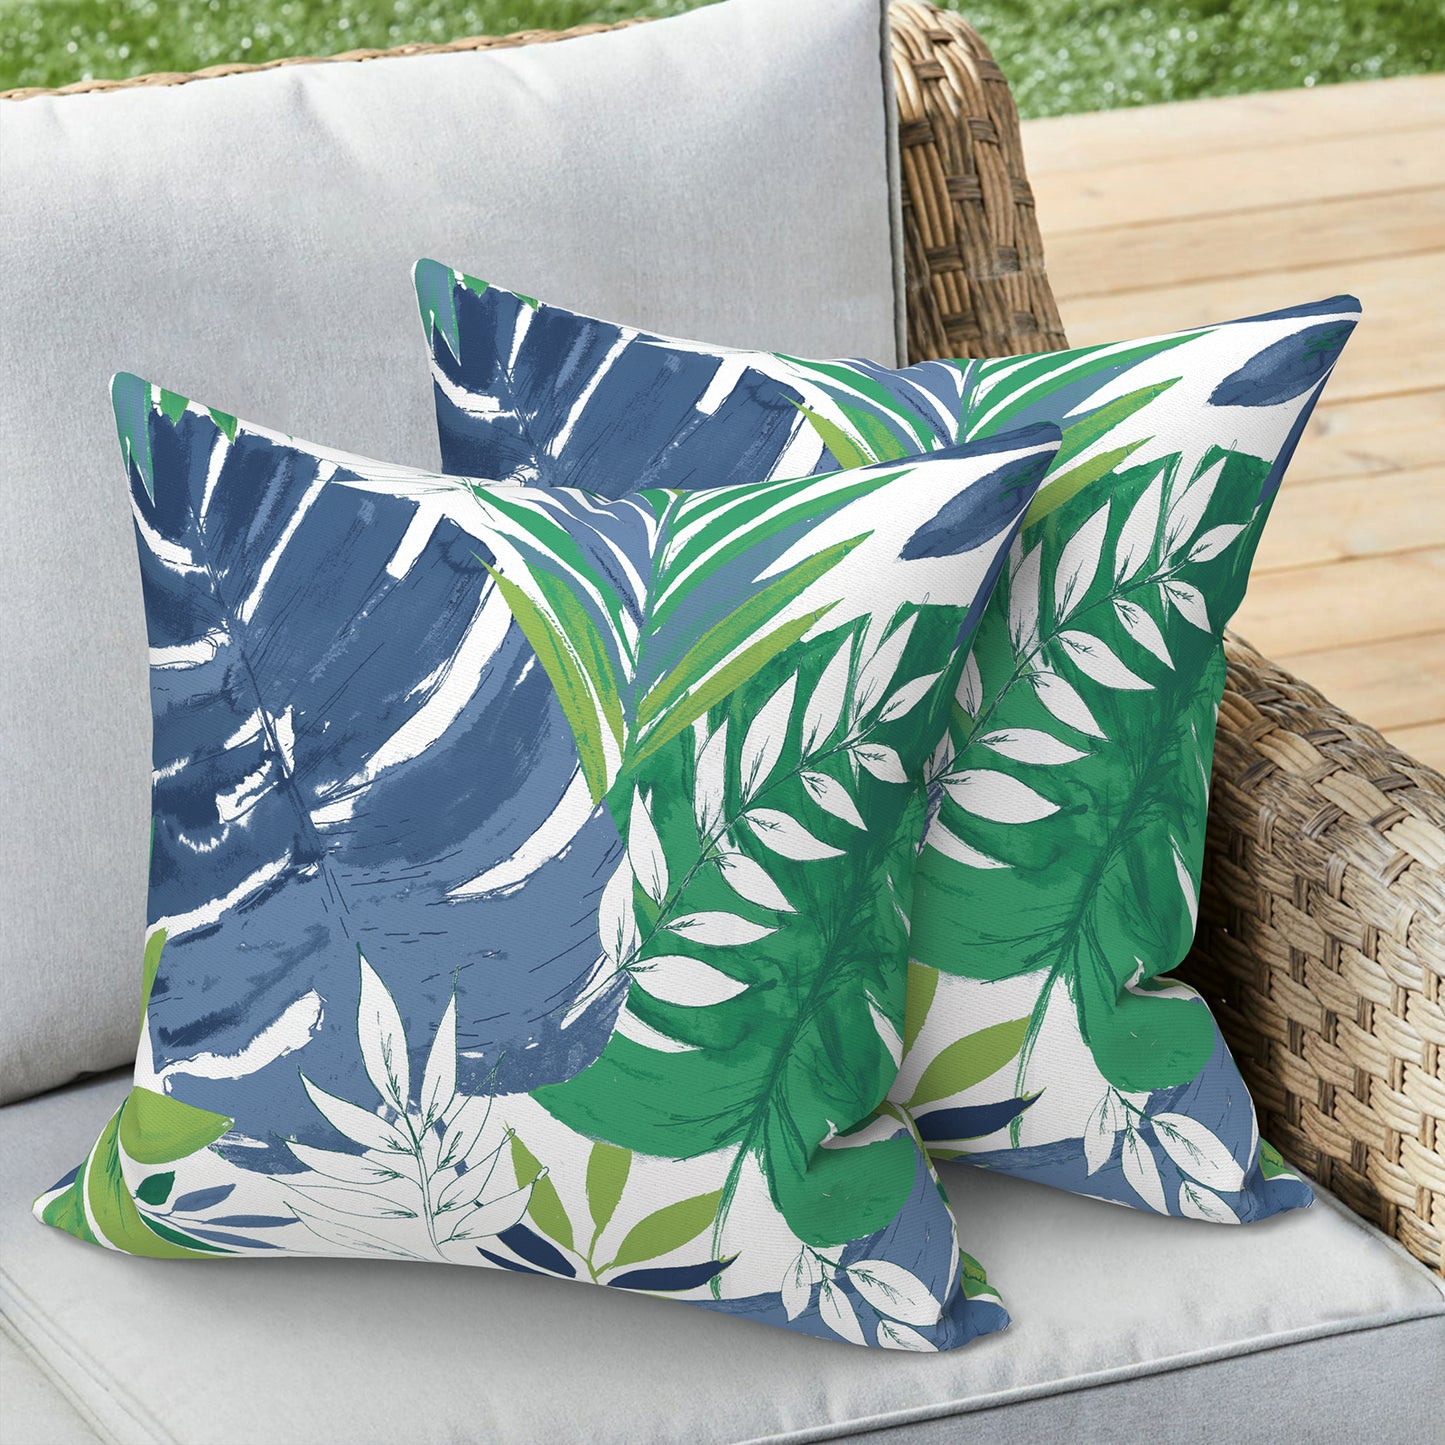 Melody Elephant Outdoor Throw Pillows 16x16 Inch, water Repellent patio pillows with Inners set of 2, outdoor pillows for patio furniture home garden, Islamorada Blue Green